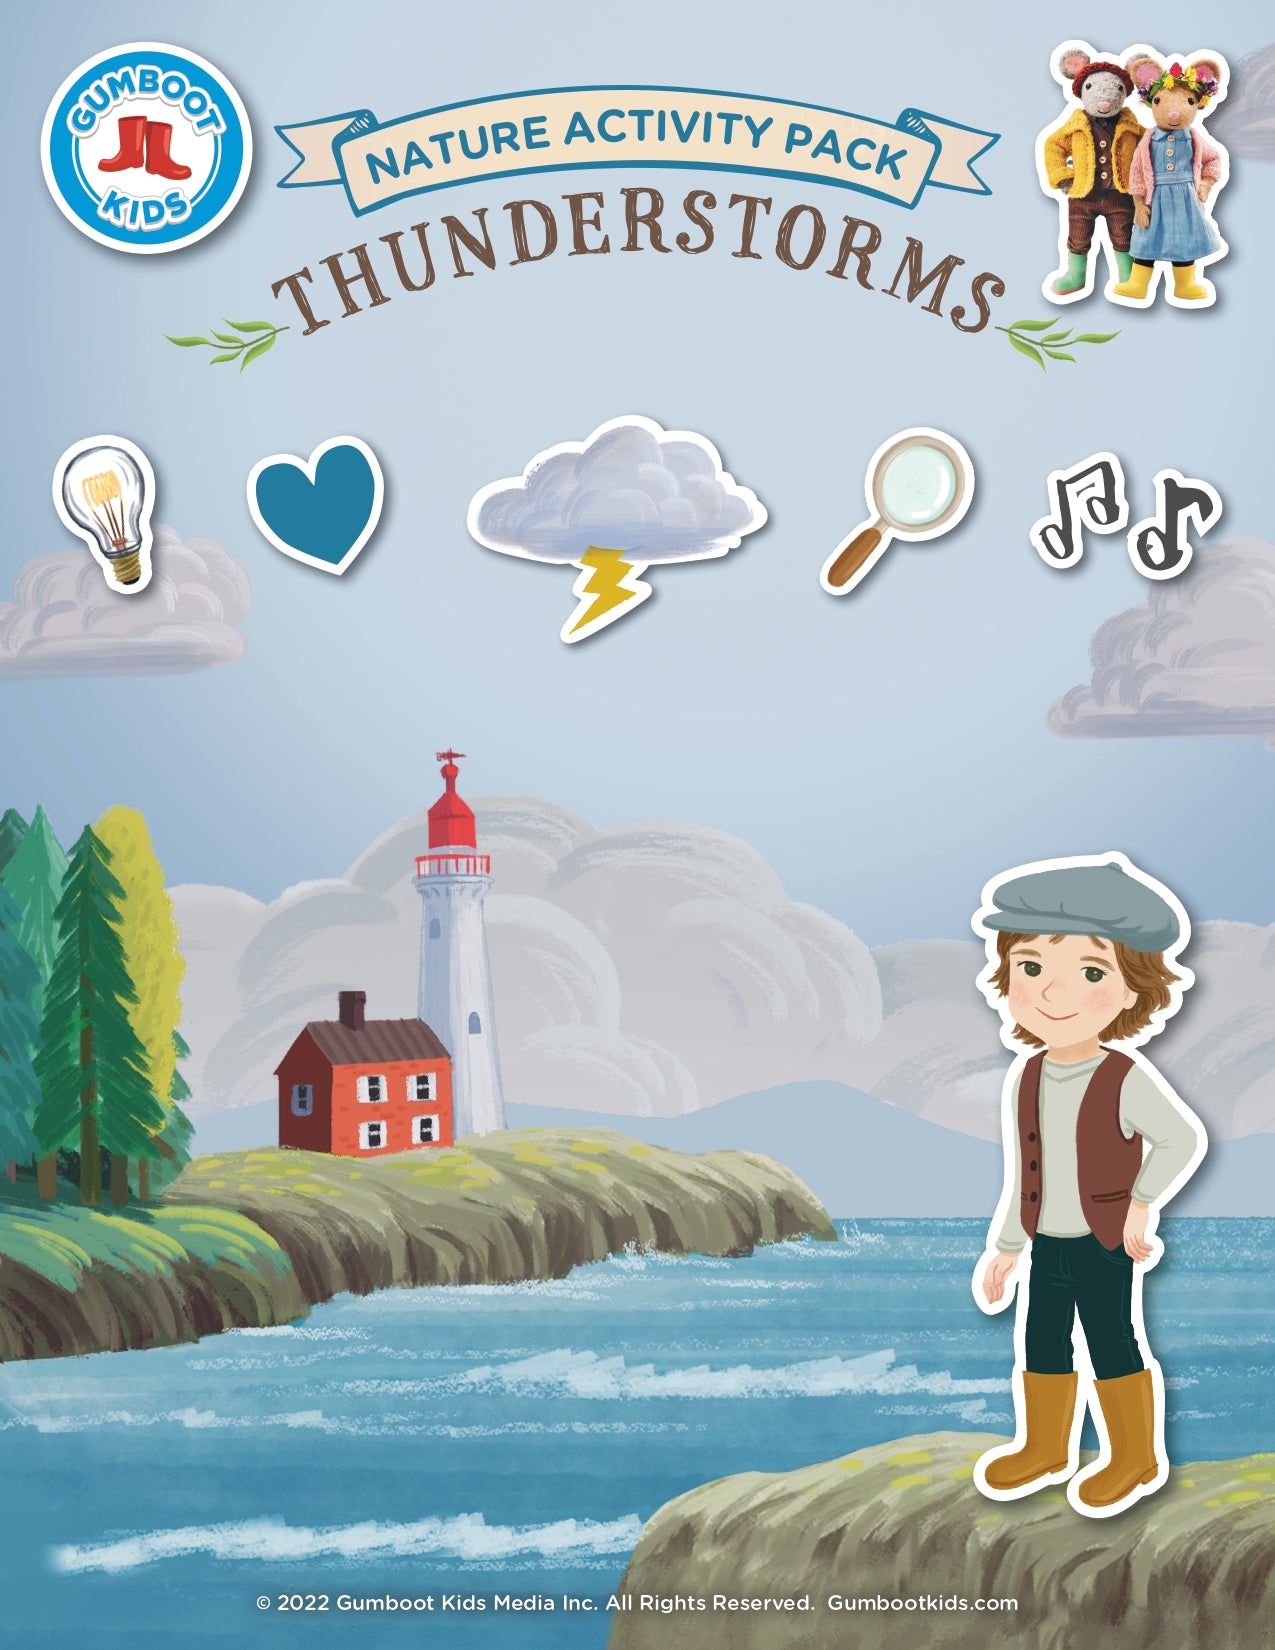 Nature, Gratitude, Mindset - Thunderstorms Activity Pack (Ages 4+)